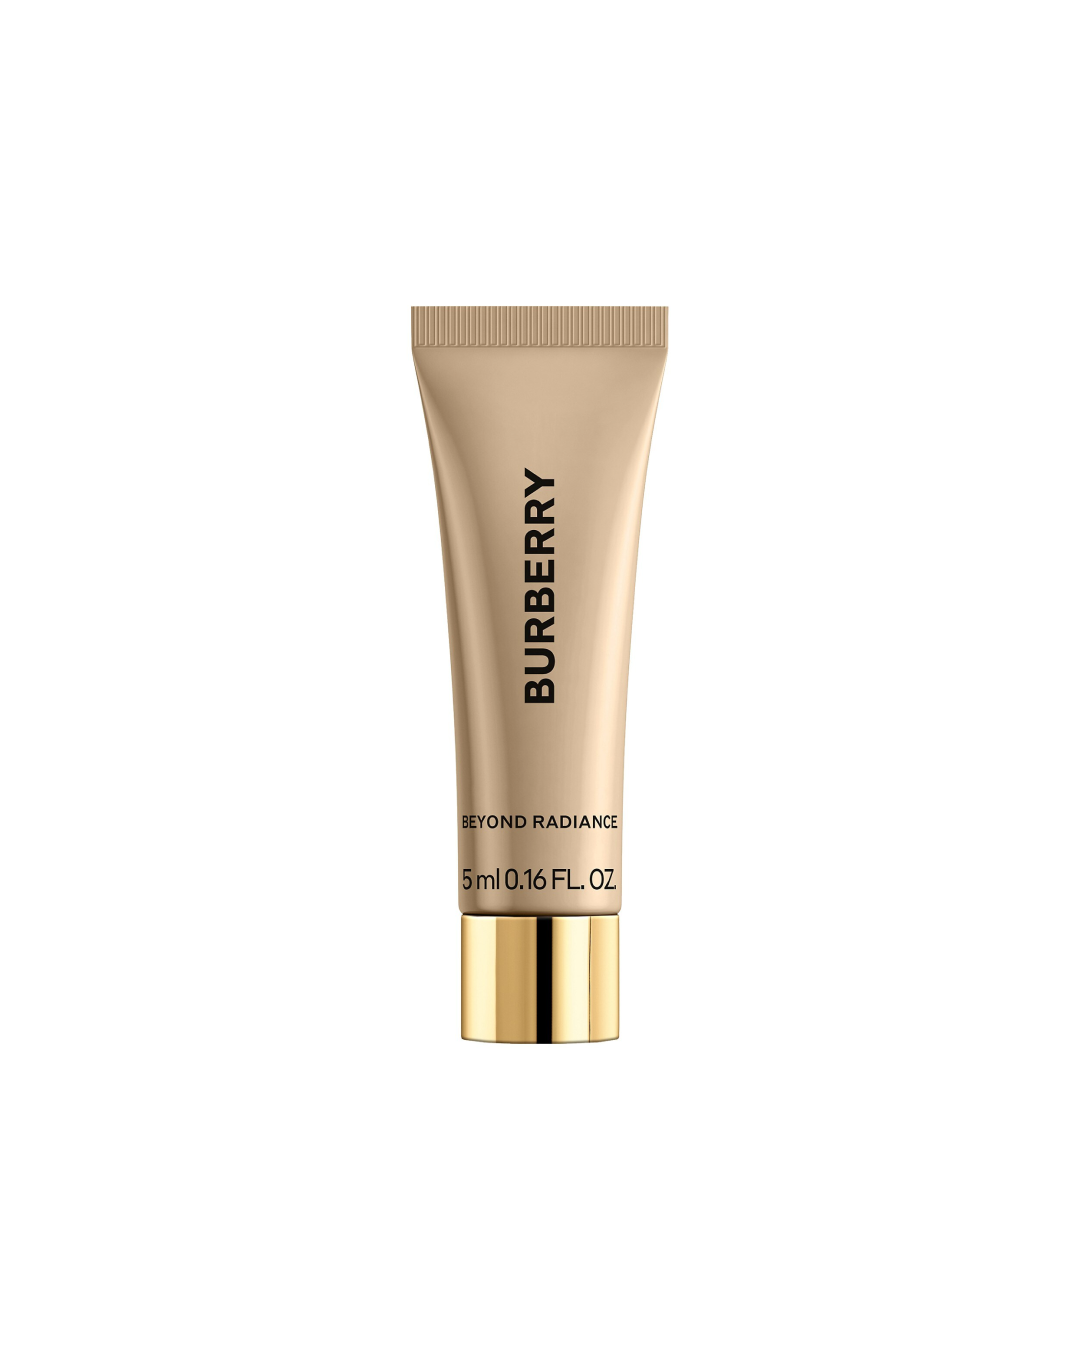 Burberry Beyond Radiance Primer in Bare Glow (5ml) - Best Buy World Philippines